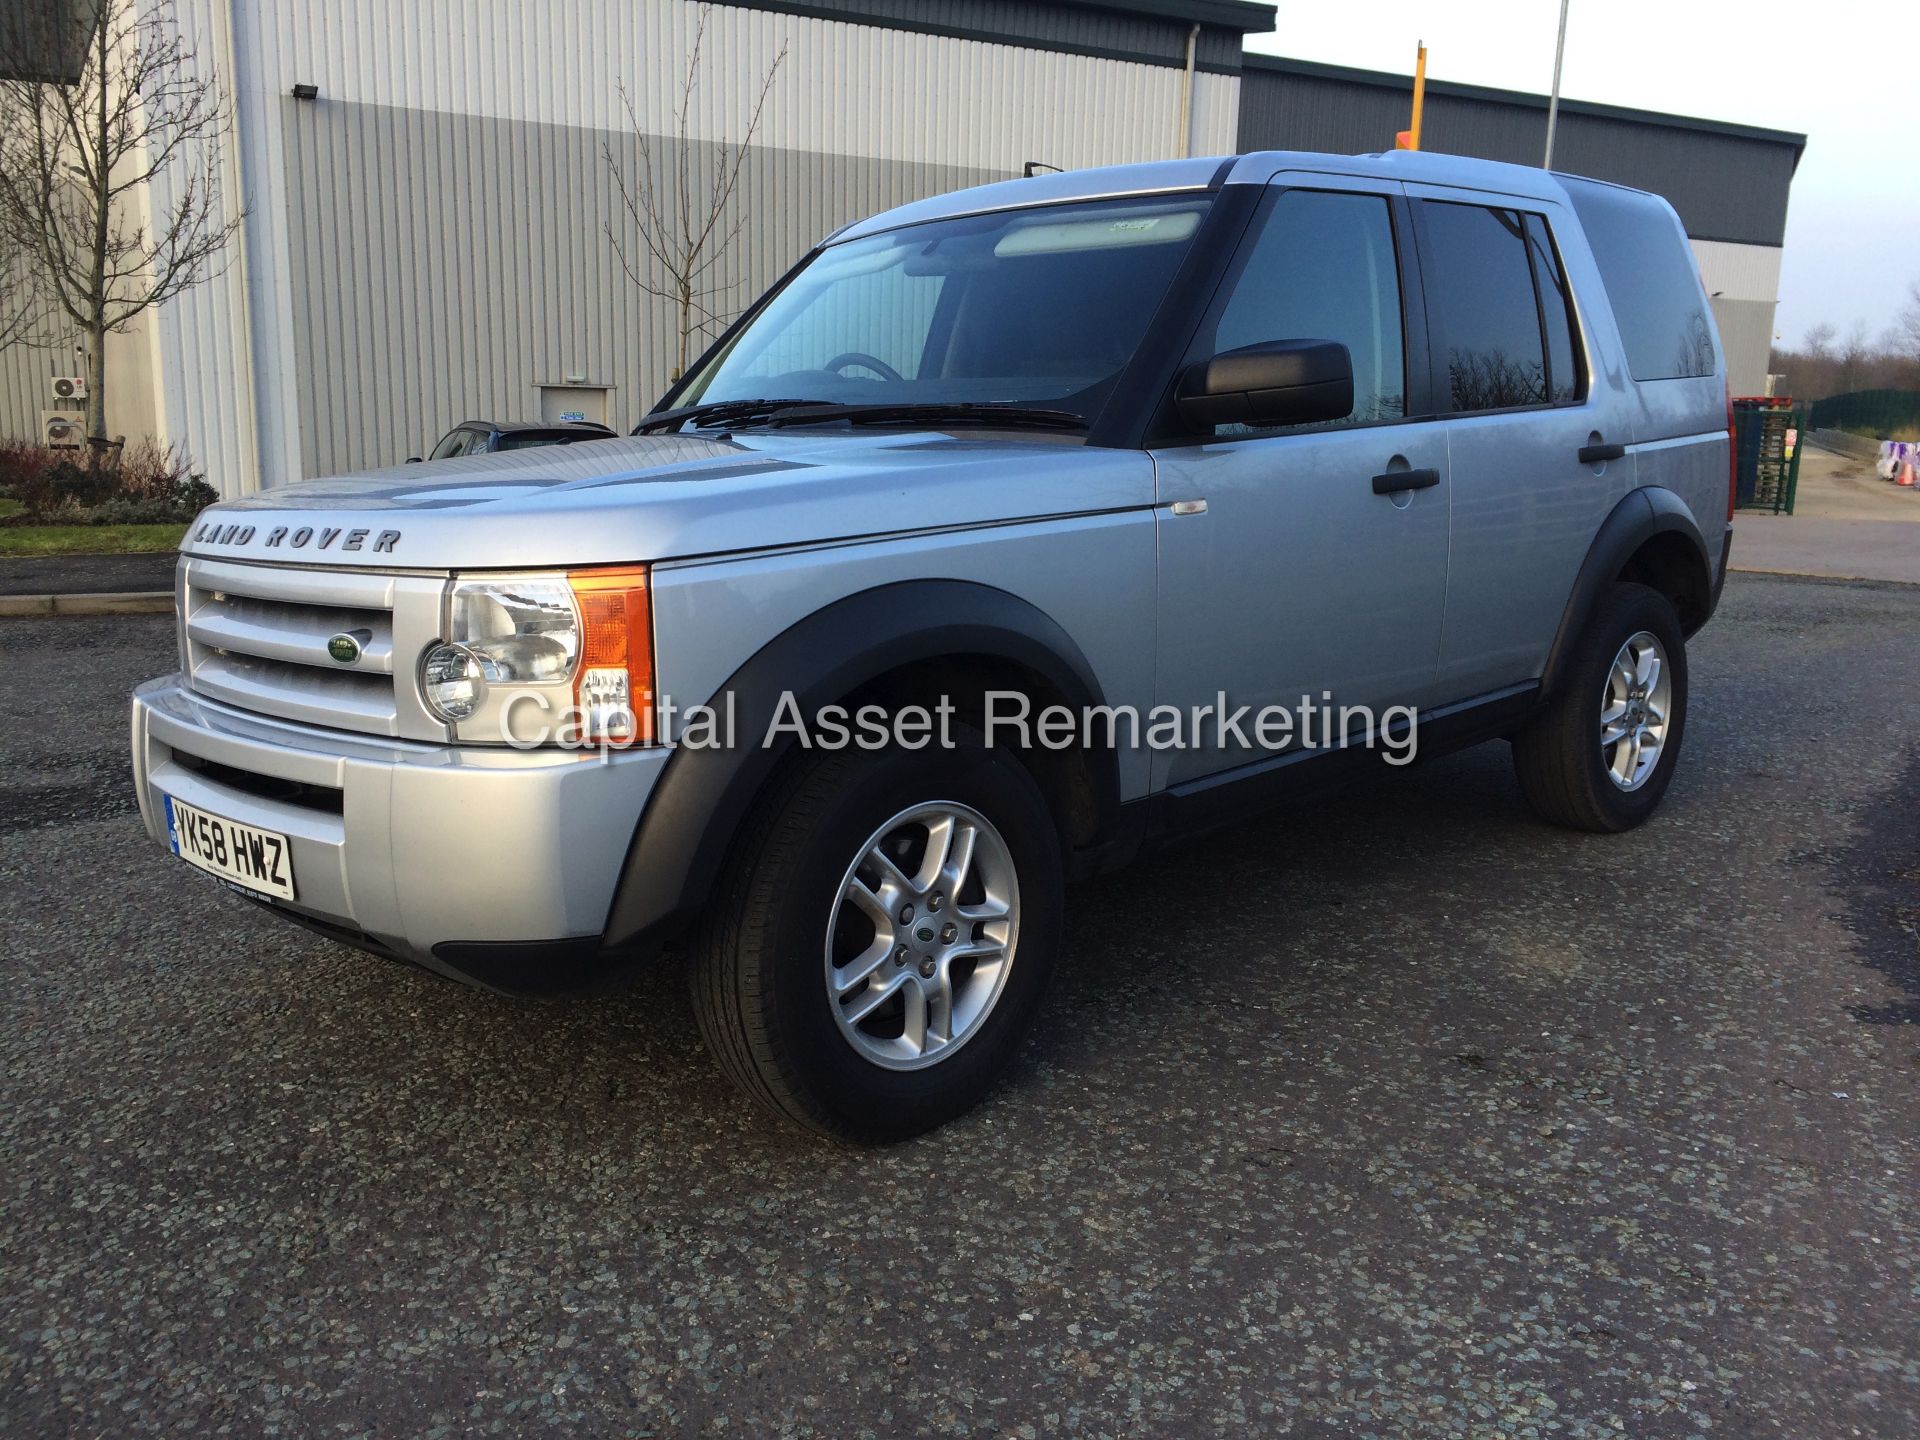 LANDROVER DISCOVERY 3 "TDV6" AUTOMATIC - 1 PREVIOUS OWNER FROM NEW - AIR SUSPENSION - PRIVACY GLASS!